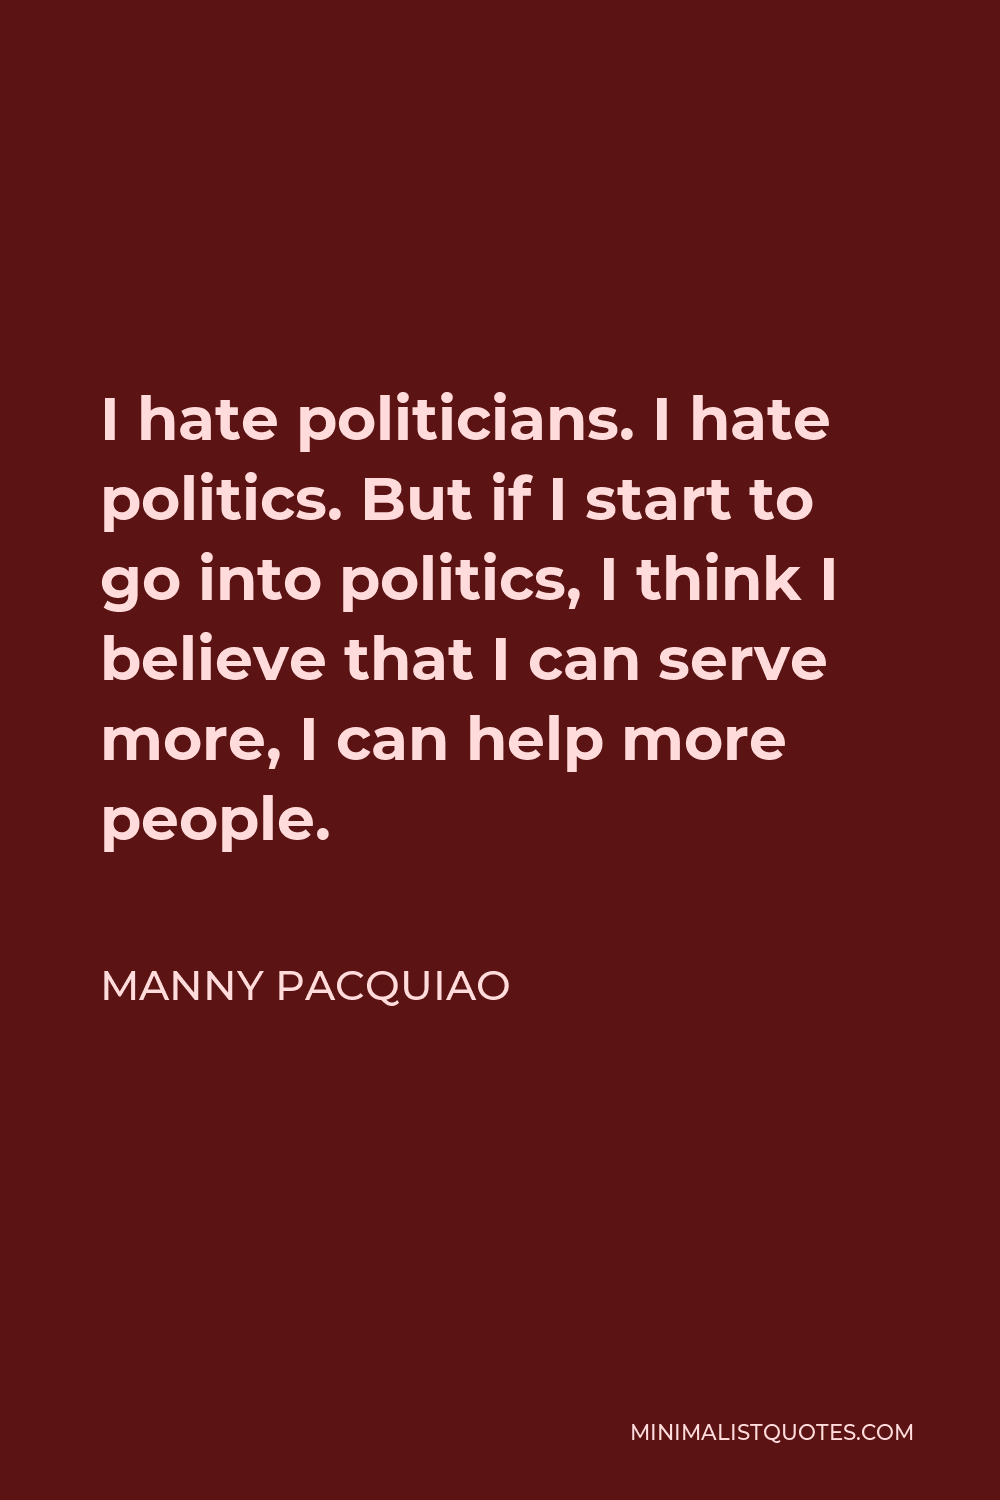 Manny Pacquiao Quote - I hate politicians. I hate politics. But if I start to go into politics, I think I believe that I can serve more, I can help more people.